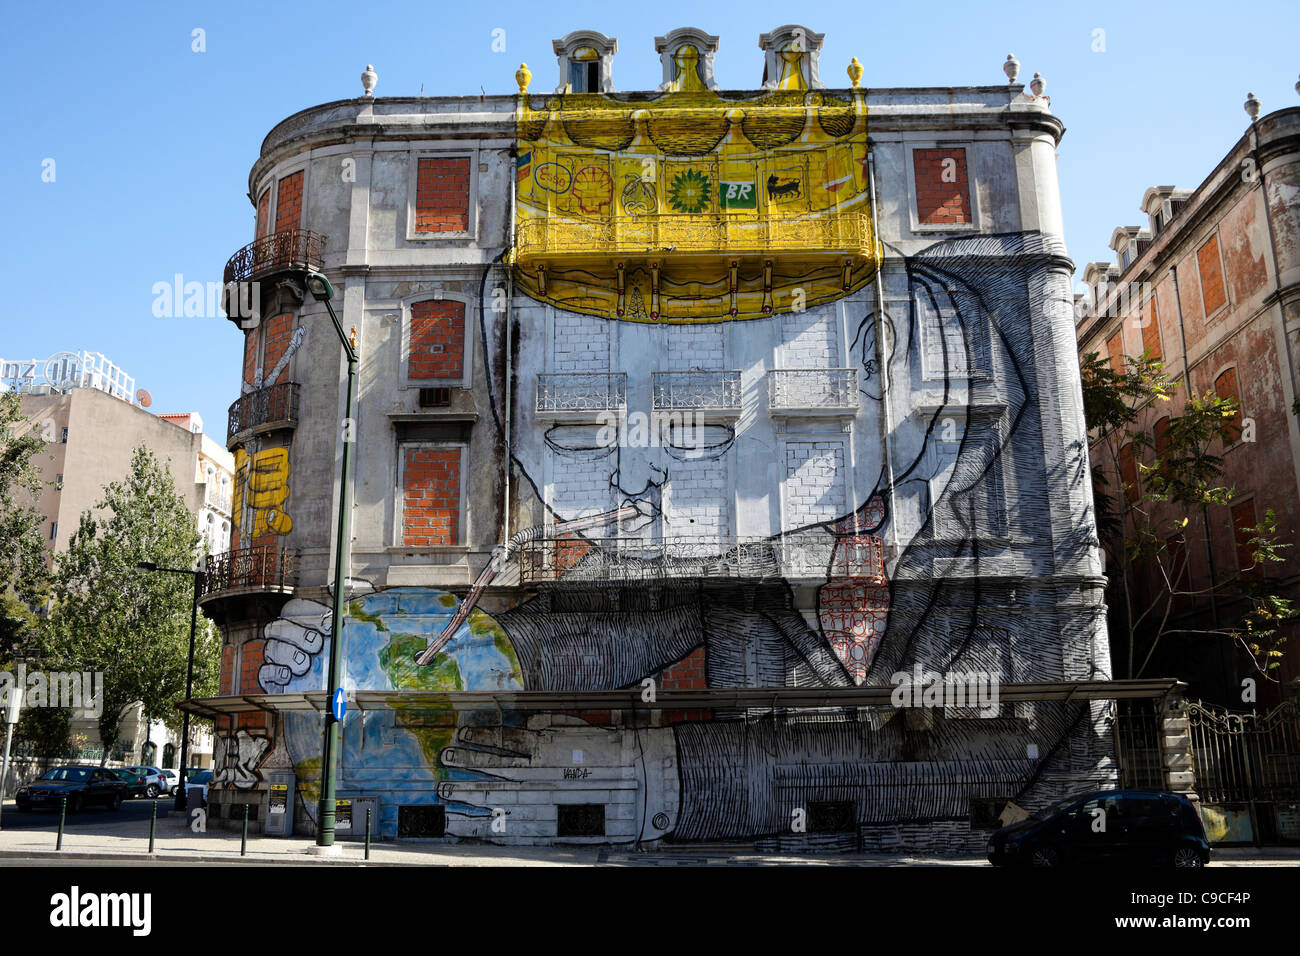 Graffiti on outer walls of derelict building, Lisbon Portugal Europe Stock Photo